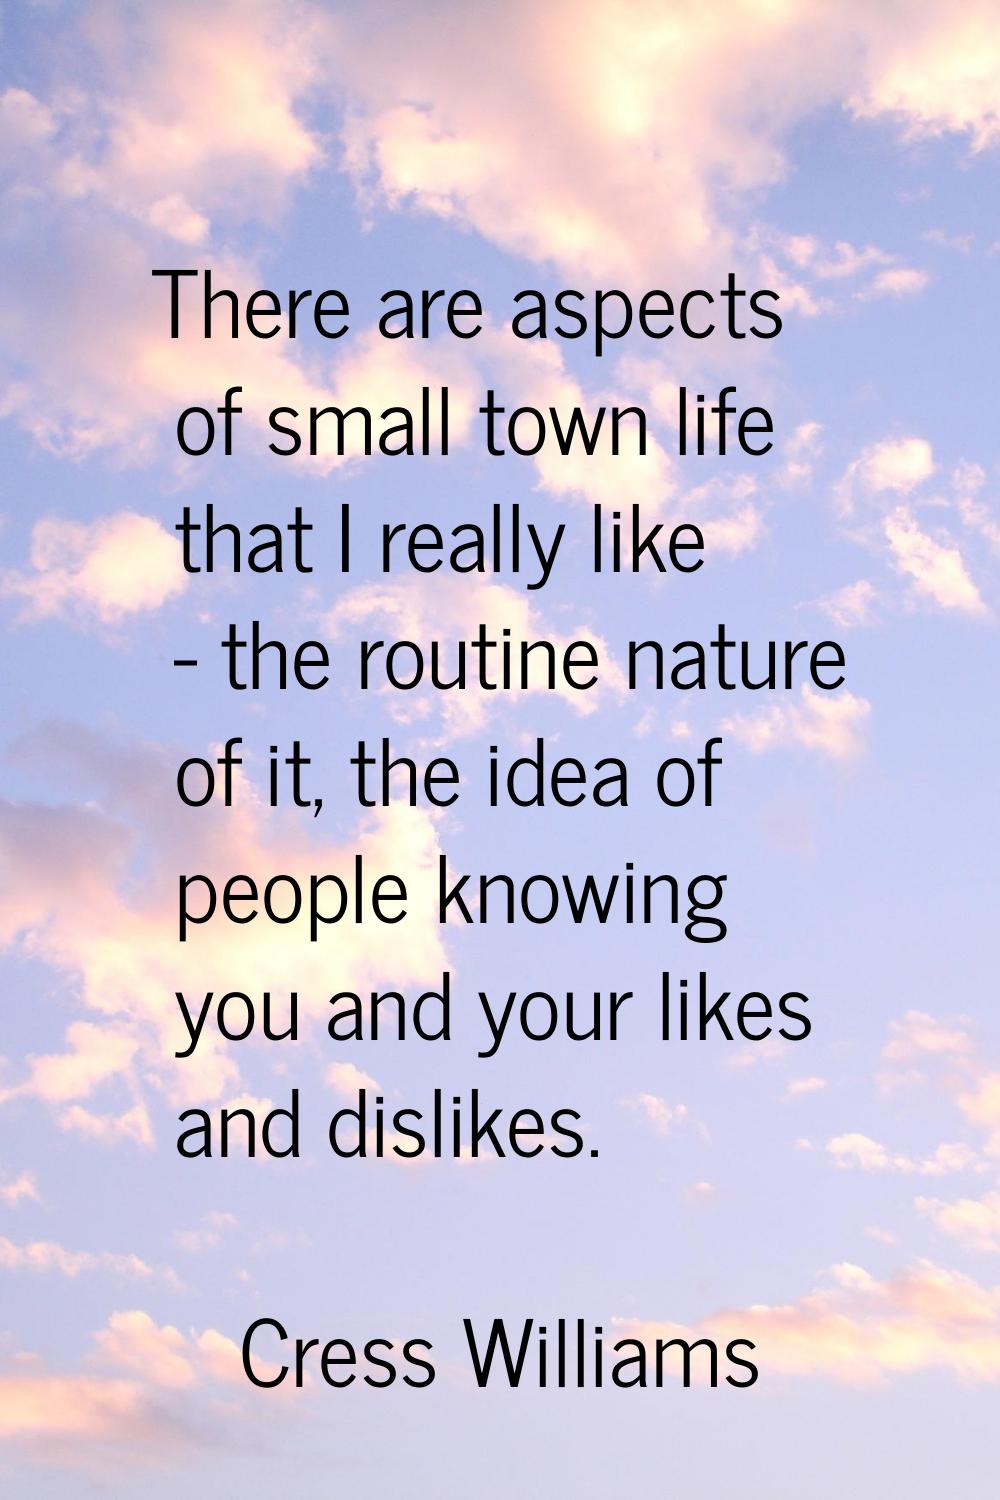 There are aspects of small town life that I really like - the routine nature of it, the idea of peo